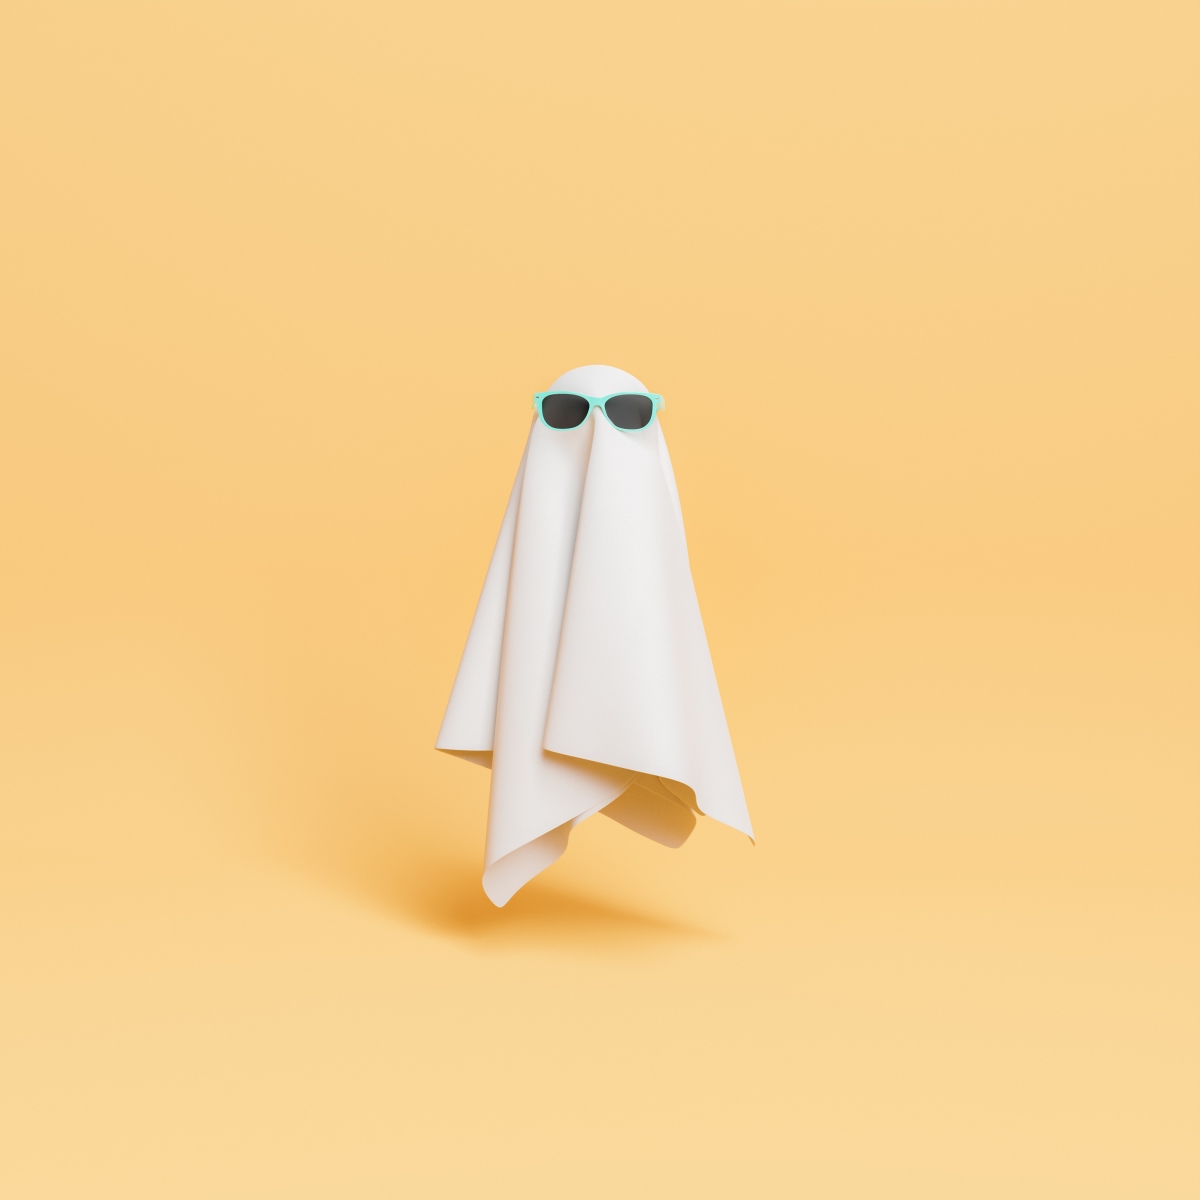 Venture capital will soon be brimming with ghosts • ZebethMedia